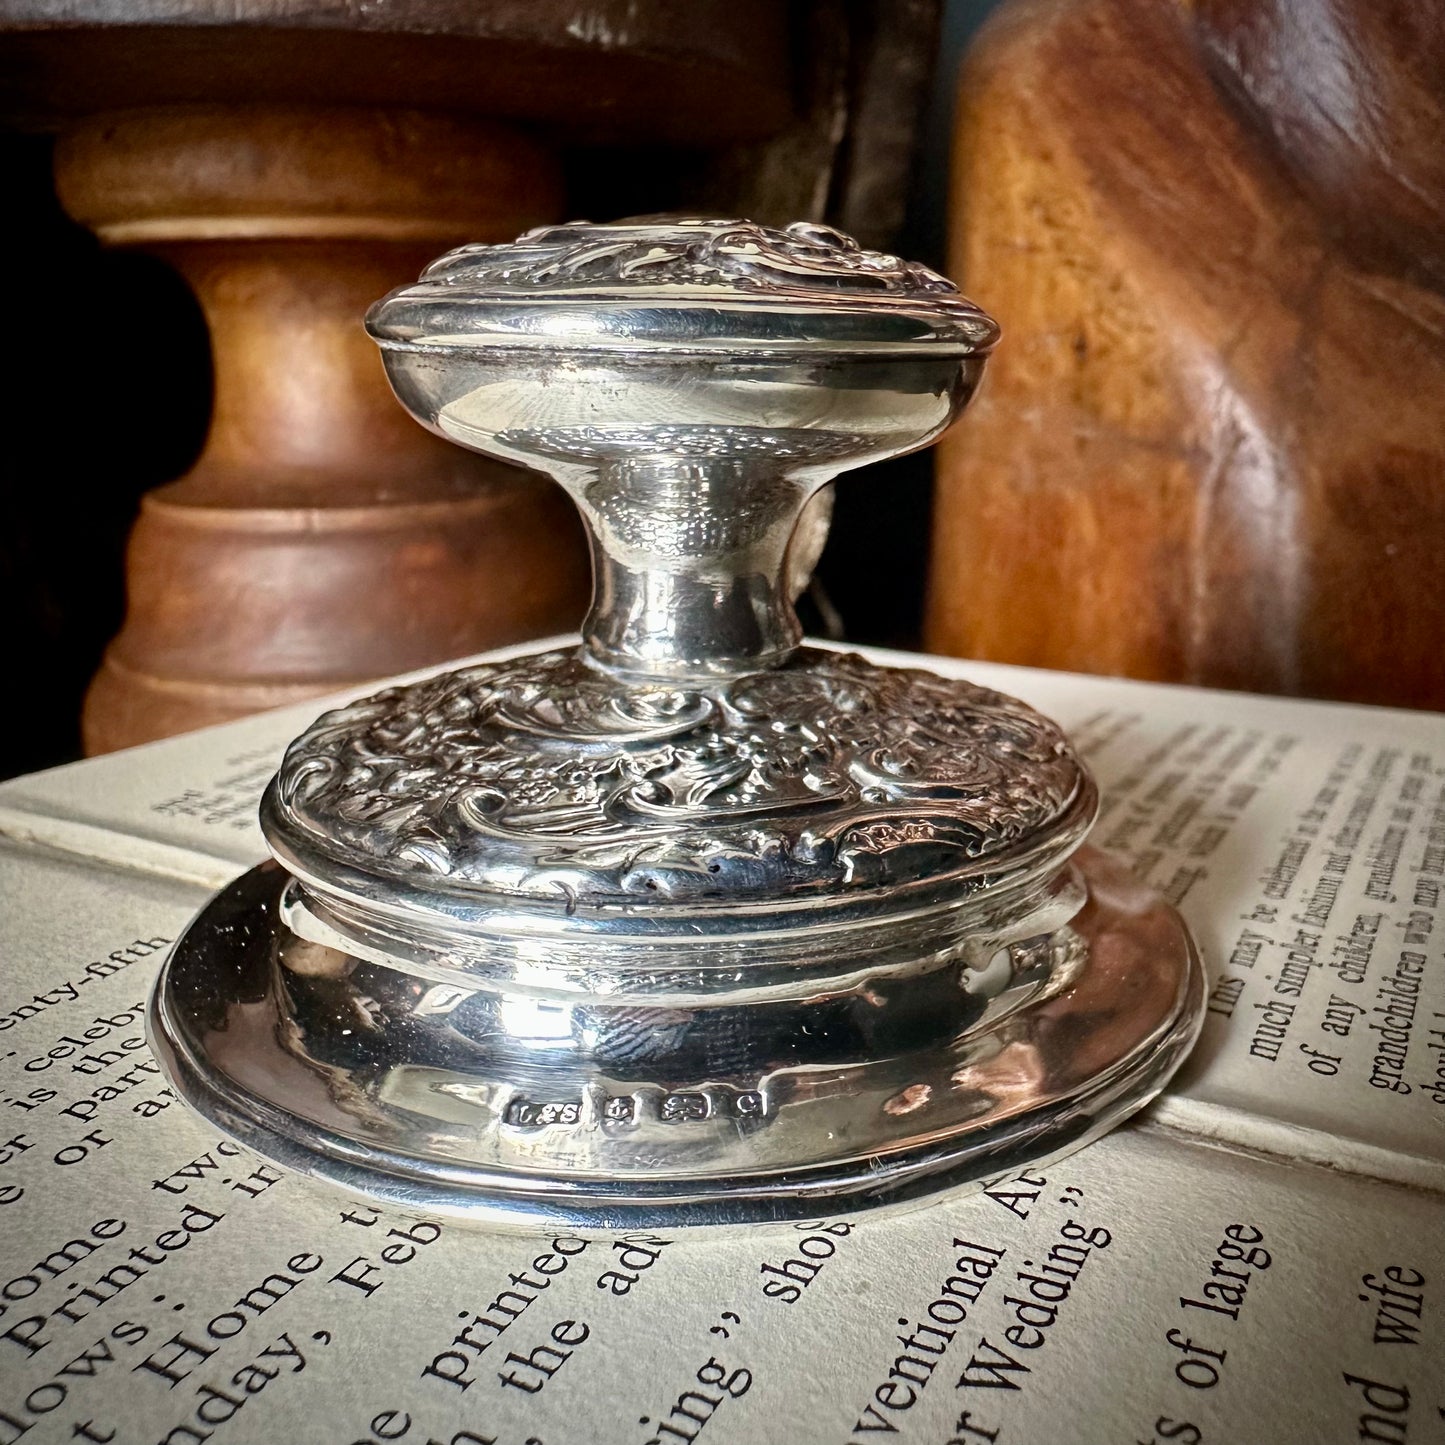 Antique Silver Paperweight / Collectible Silver / 1902 Birmingham / Ornament